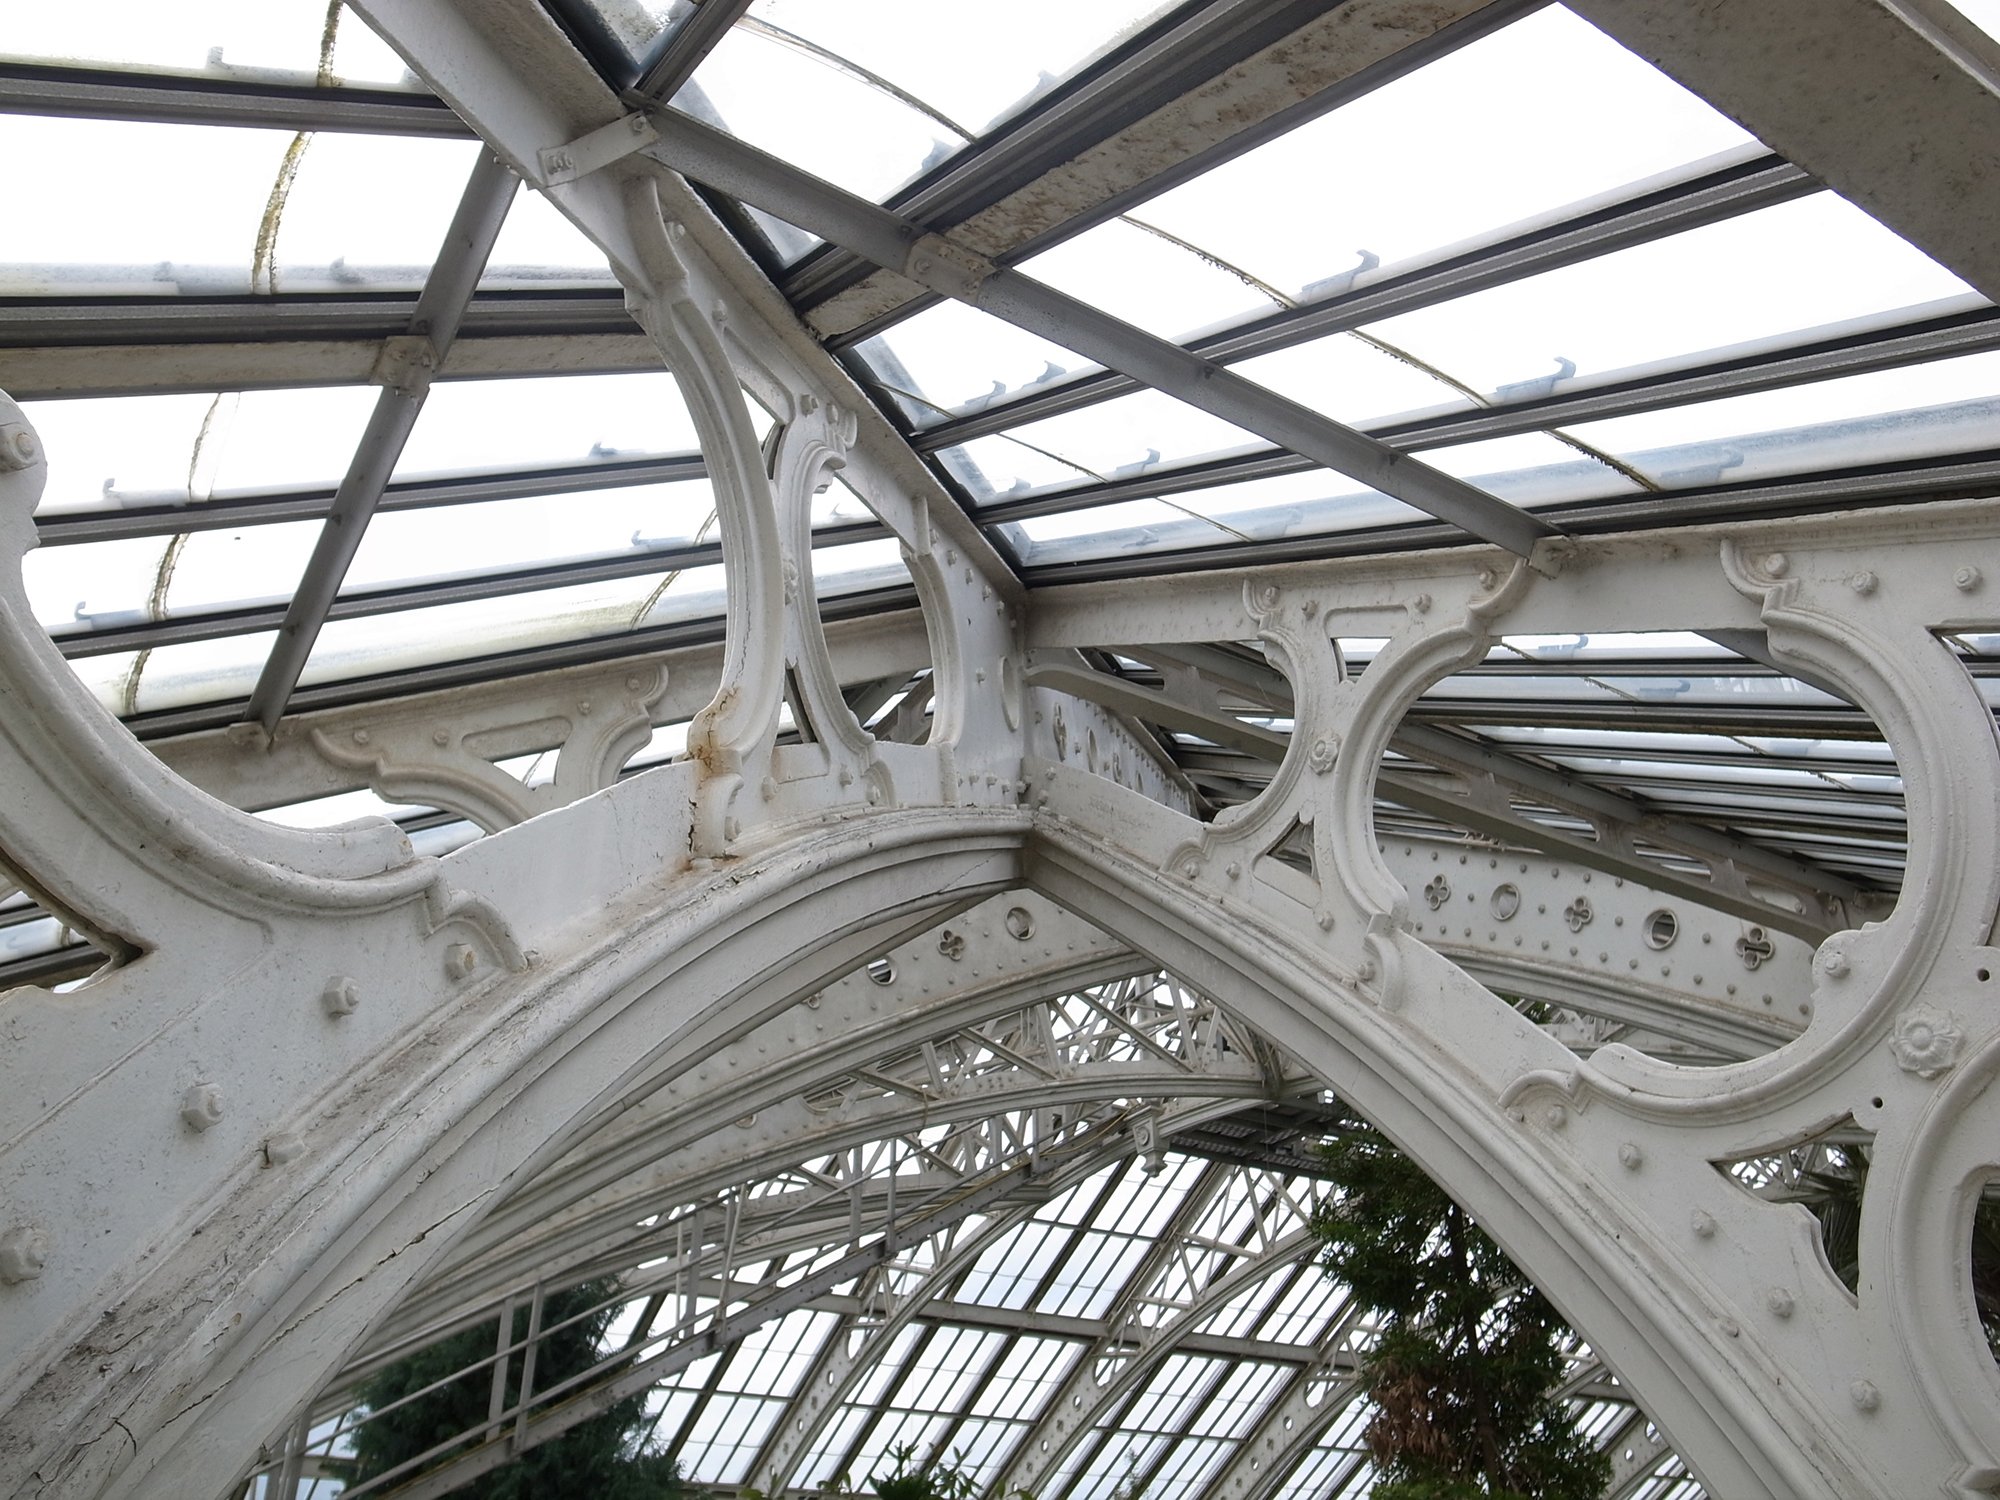 Temperate House before Restoration